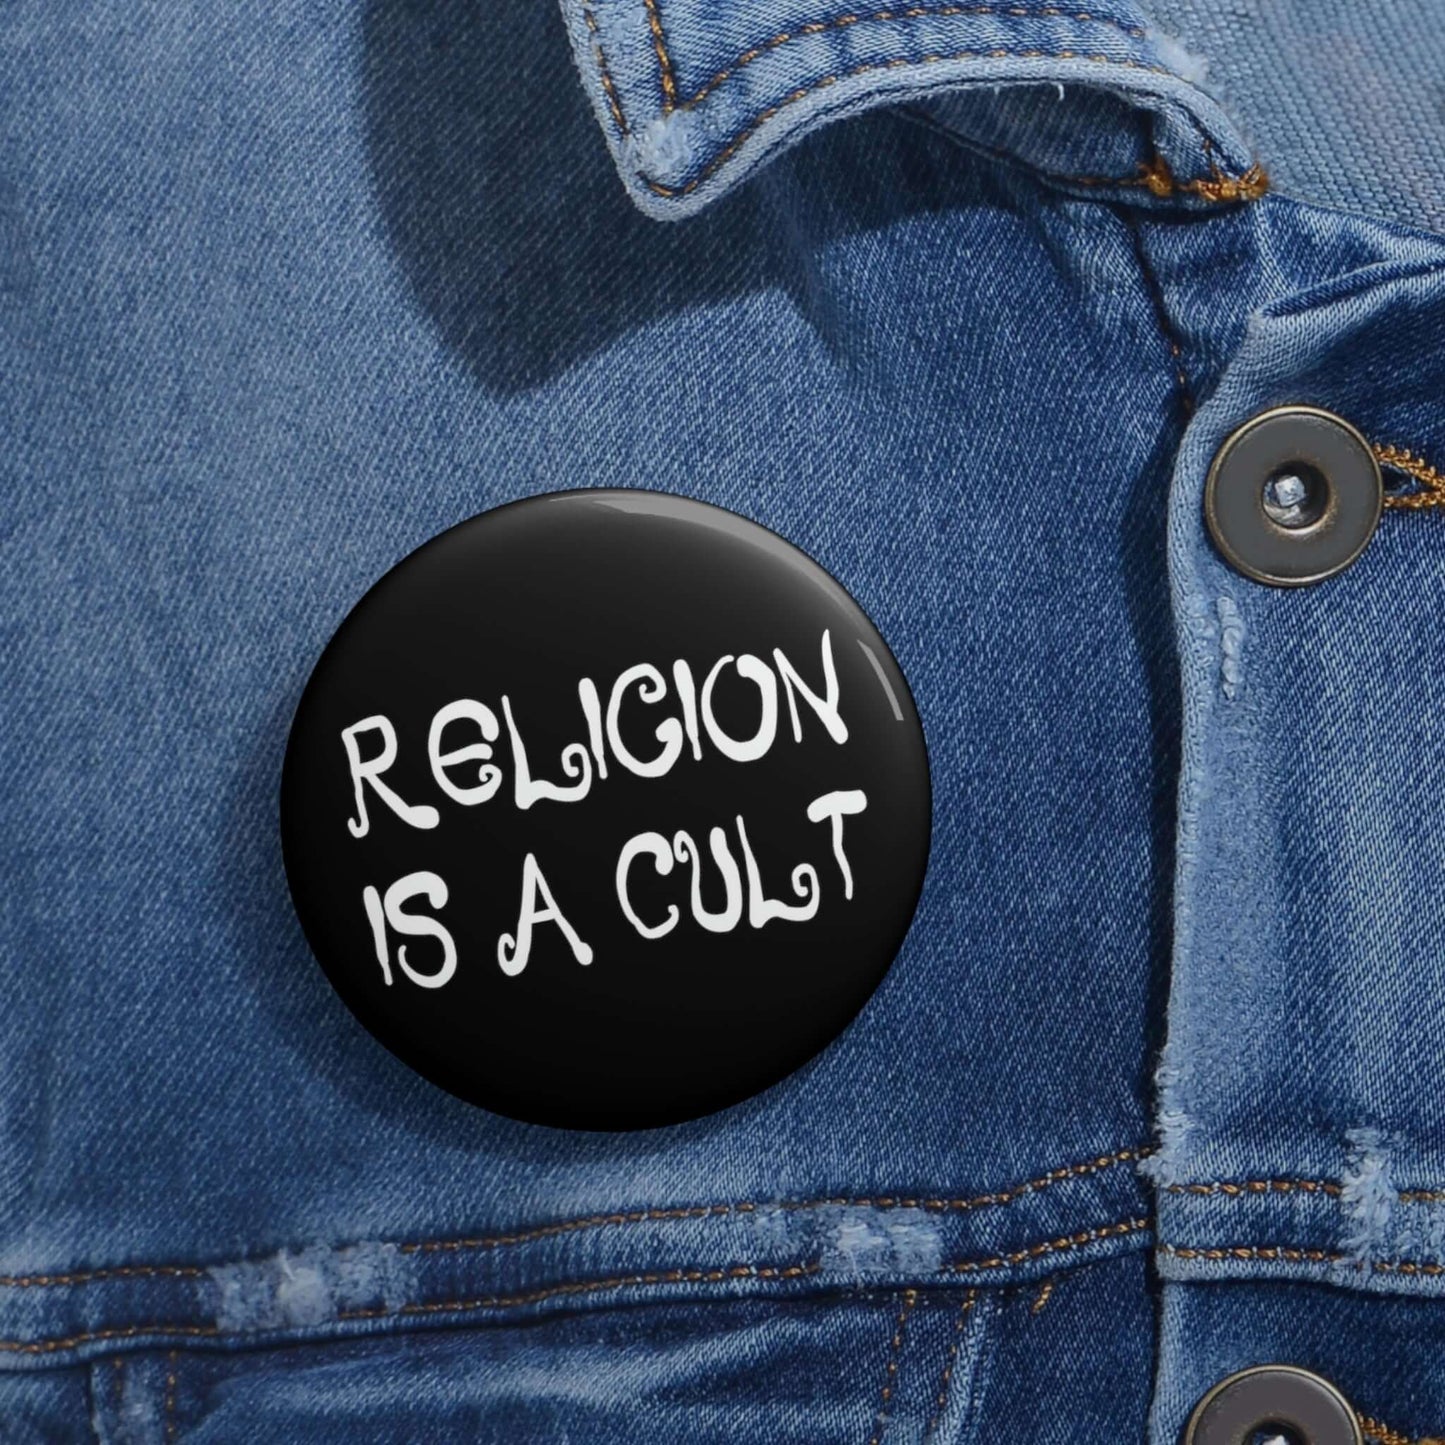 Religion is a cult pinback button